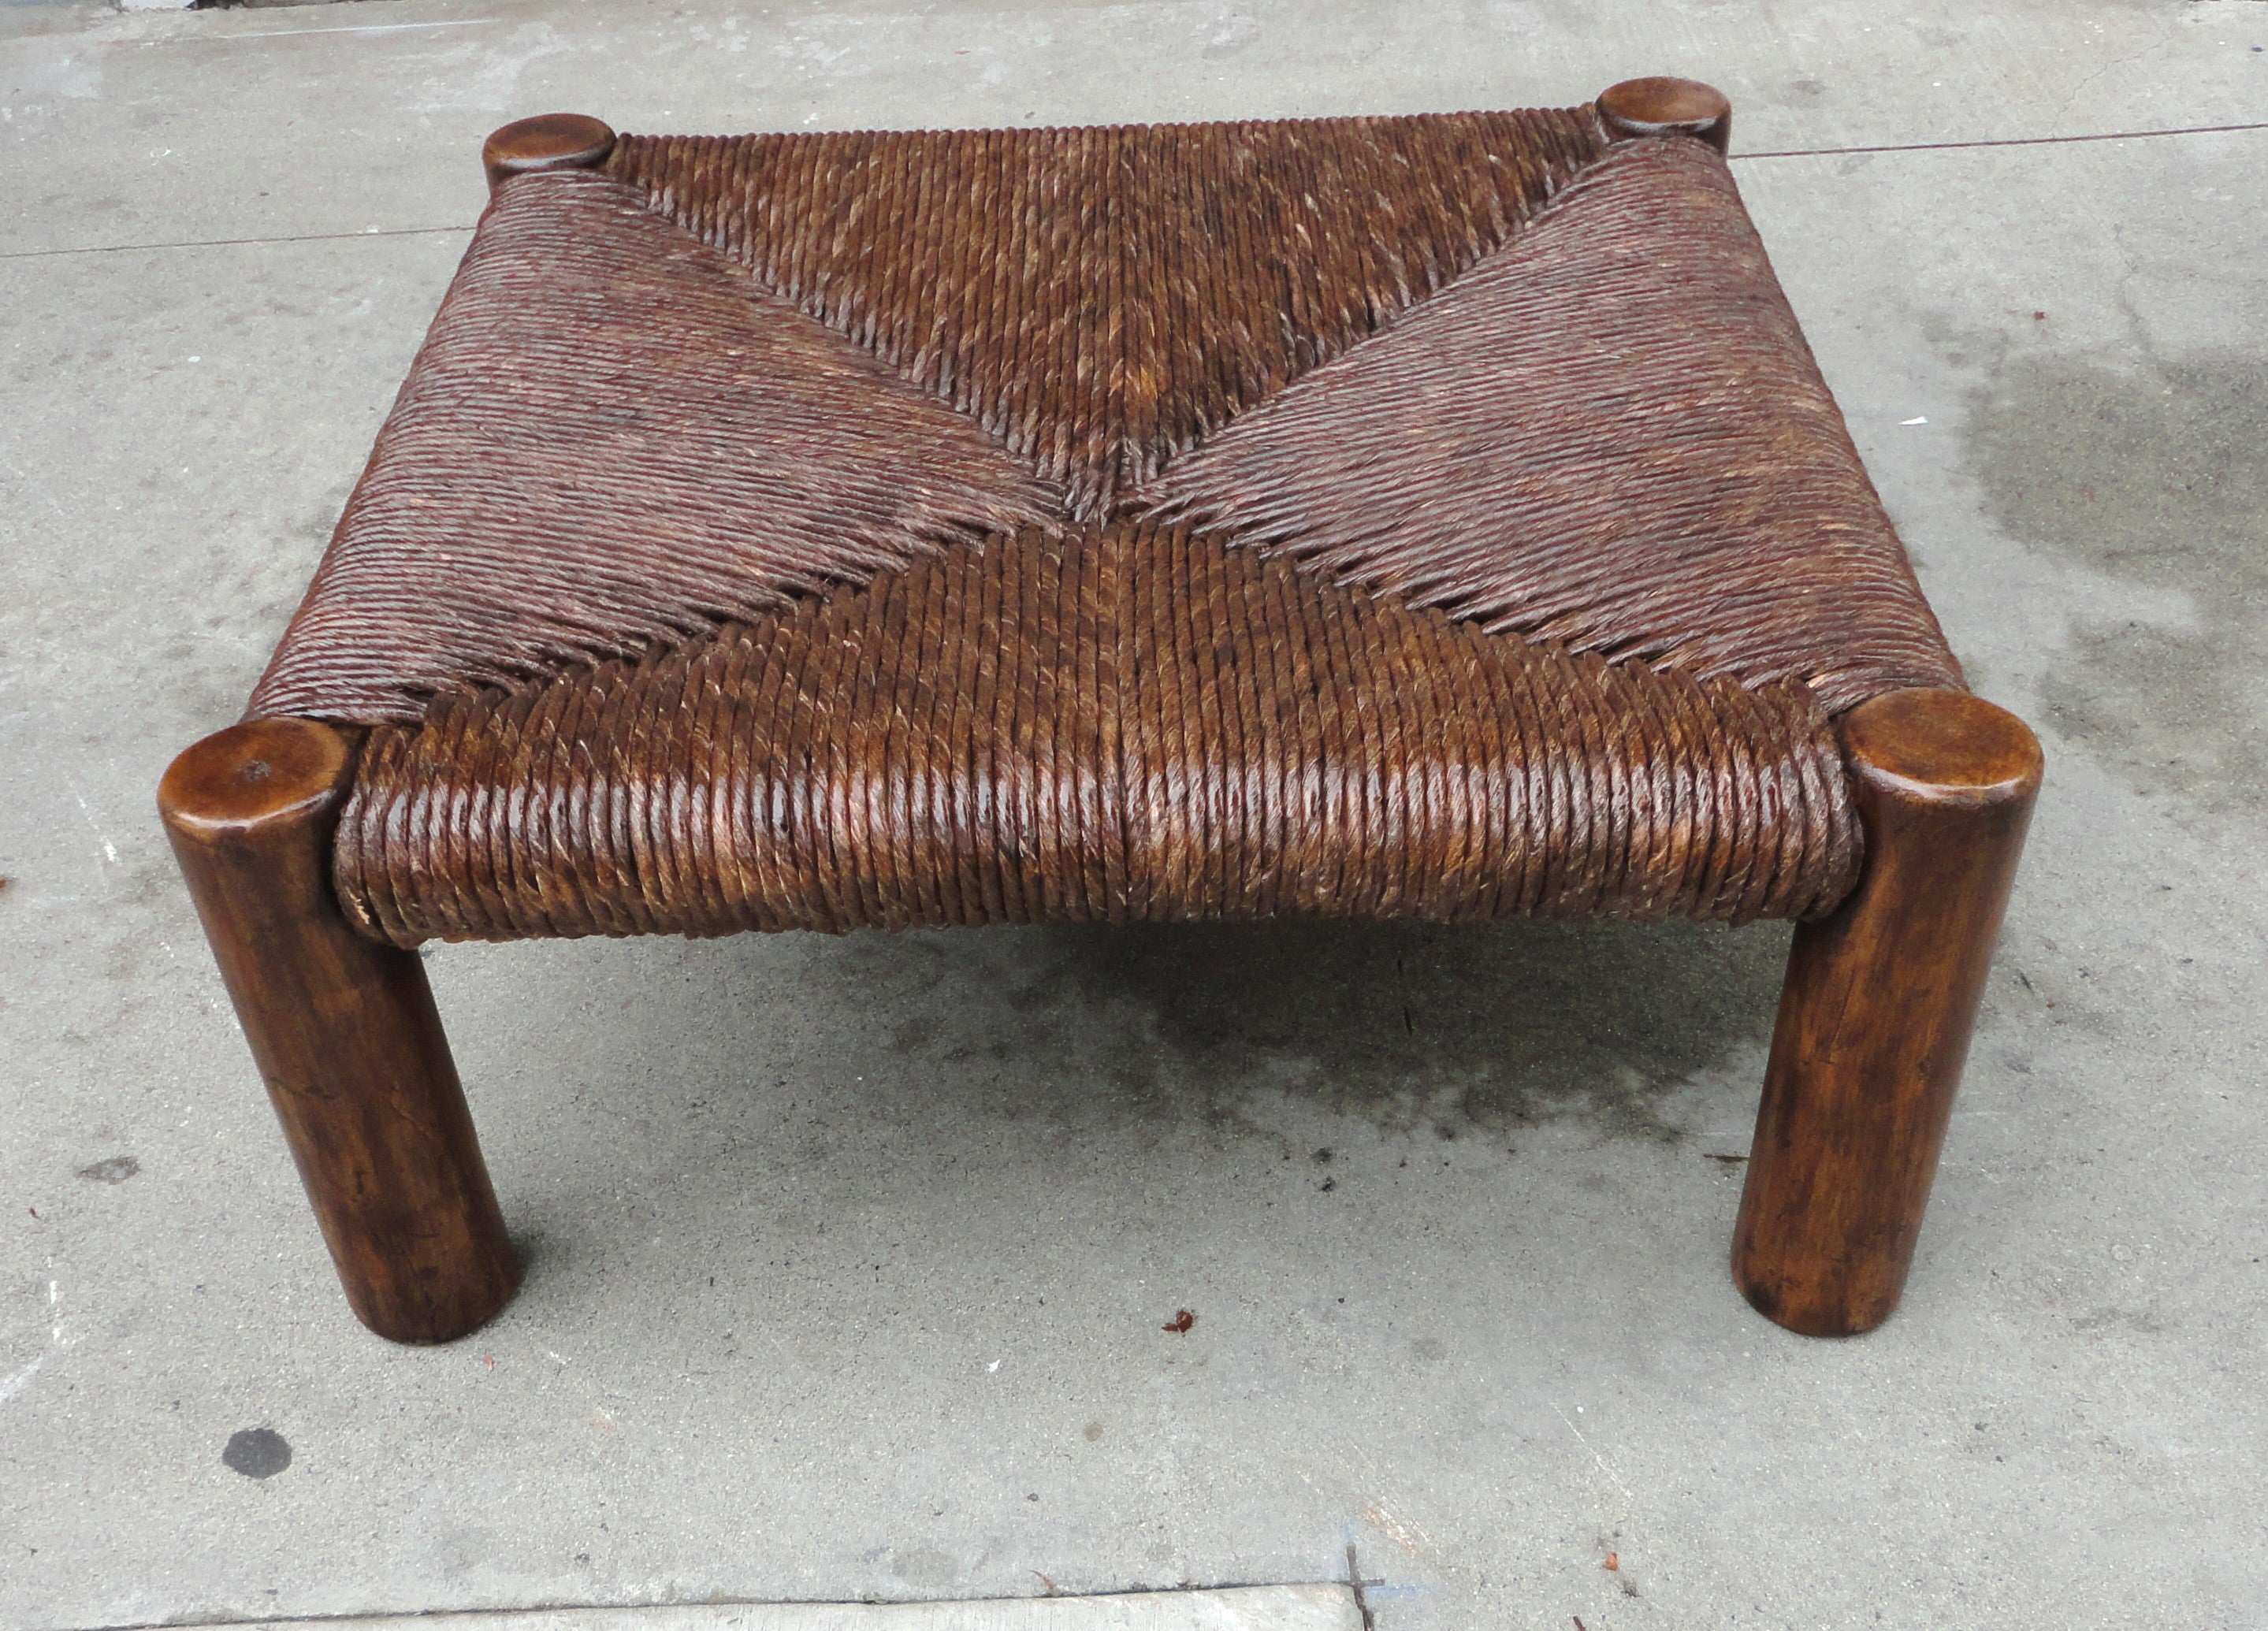 Monumental Hand Made Ottoman With Hand Woven Seat